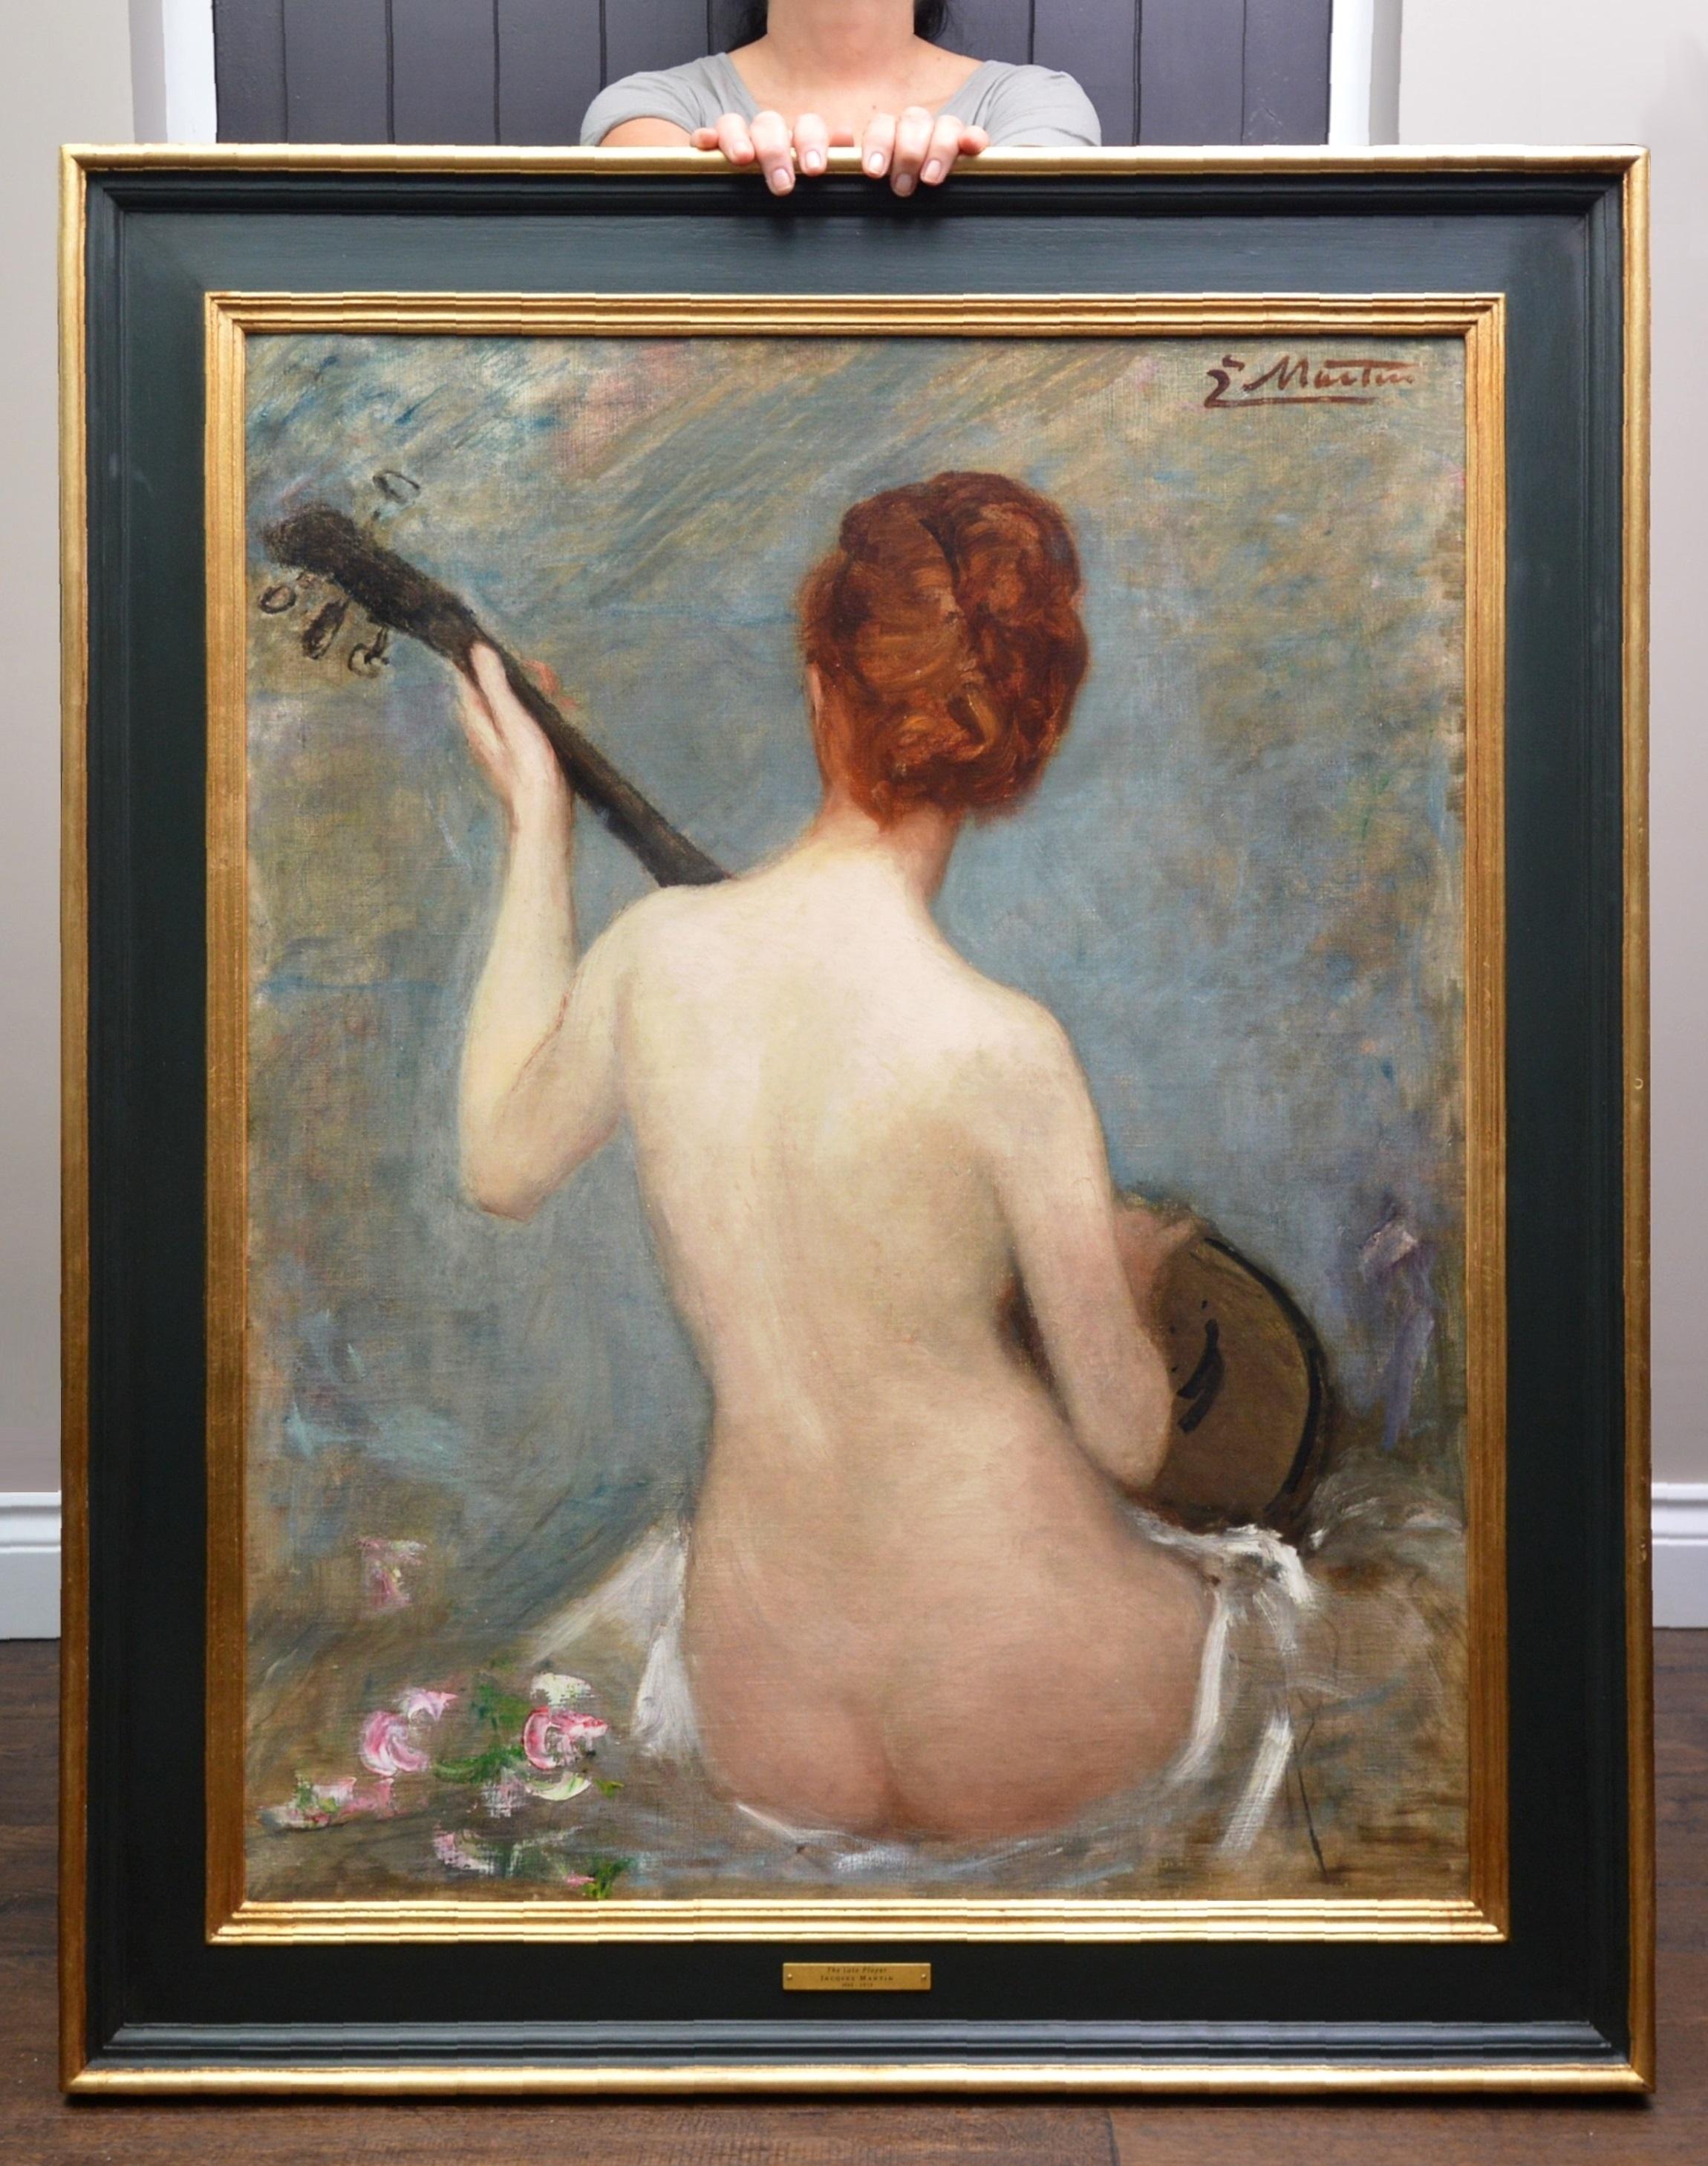 Jacques Martin Portrait Painting - The Lute Player - 19th Century French Impressionist Nude Portrait Oil Painting